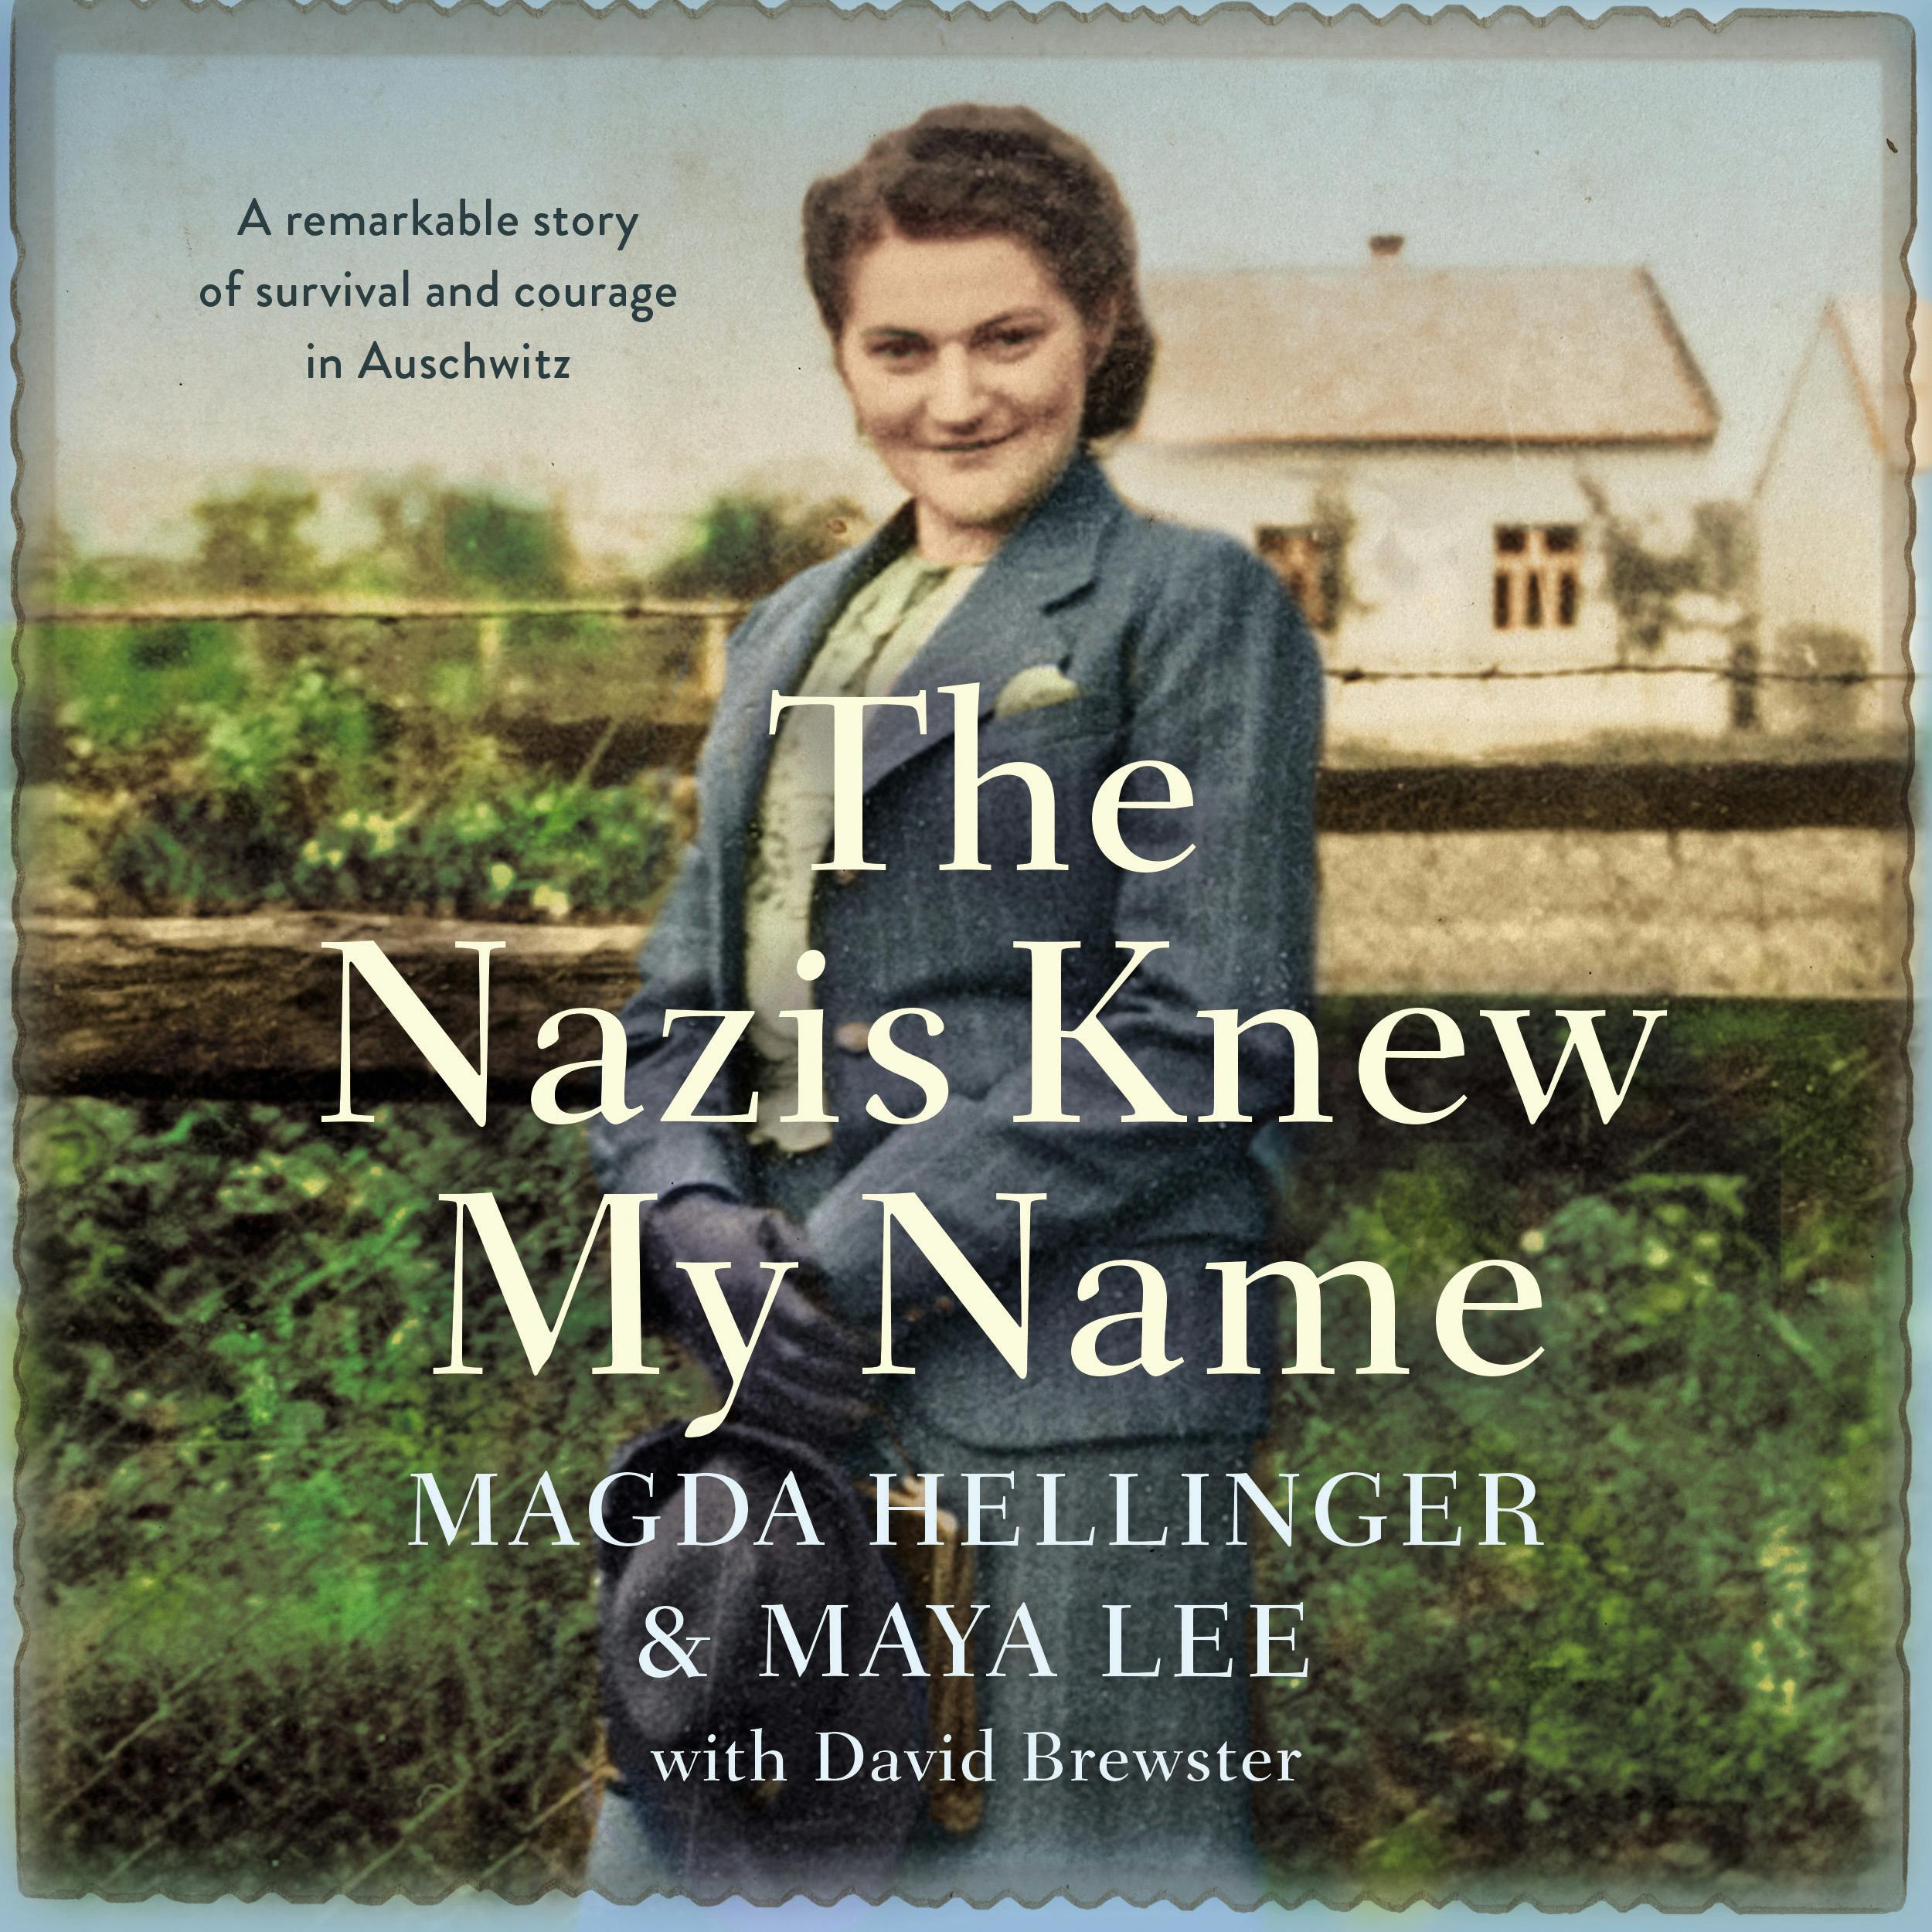 The Nazis Knew My Name: A remarkable story of survival and courage in Auschwitz - Magda Hellinger, Maya Lee